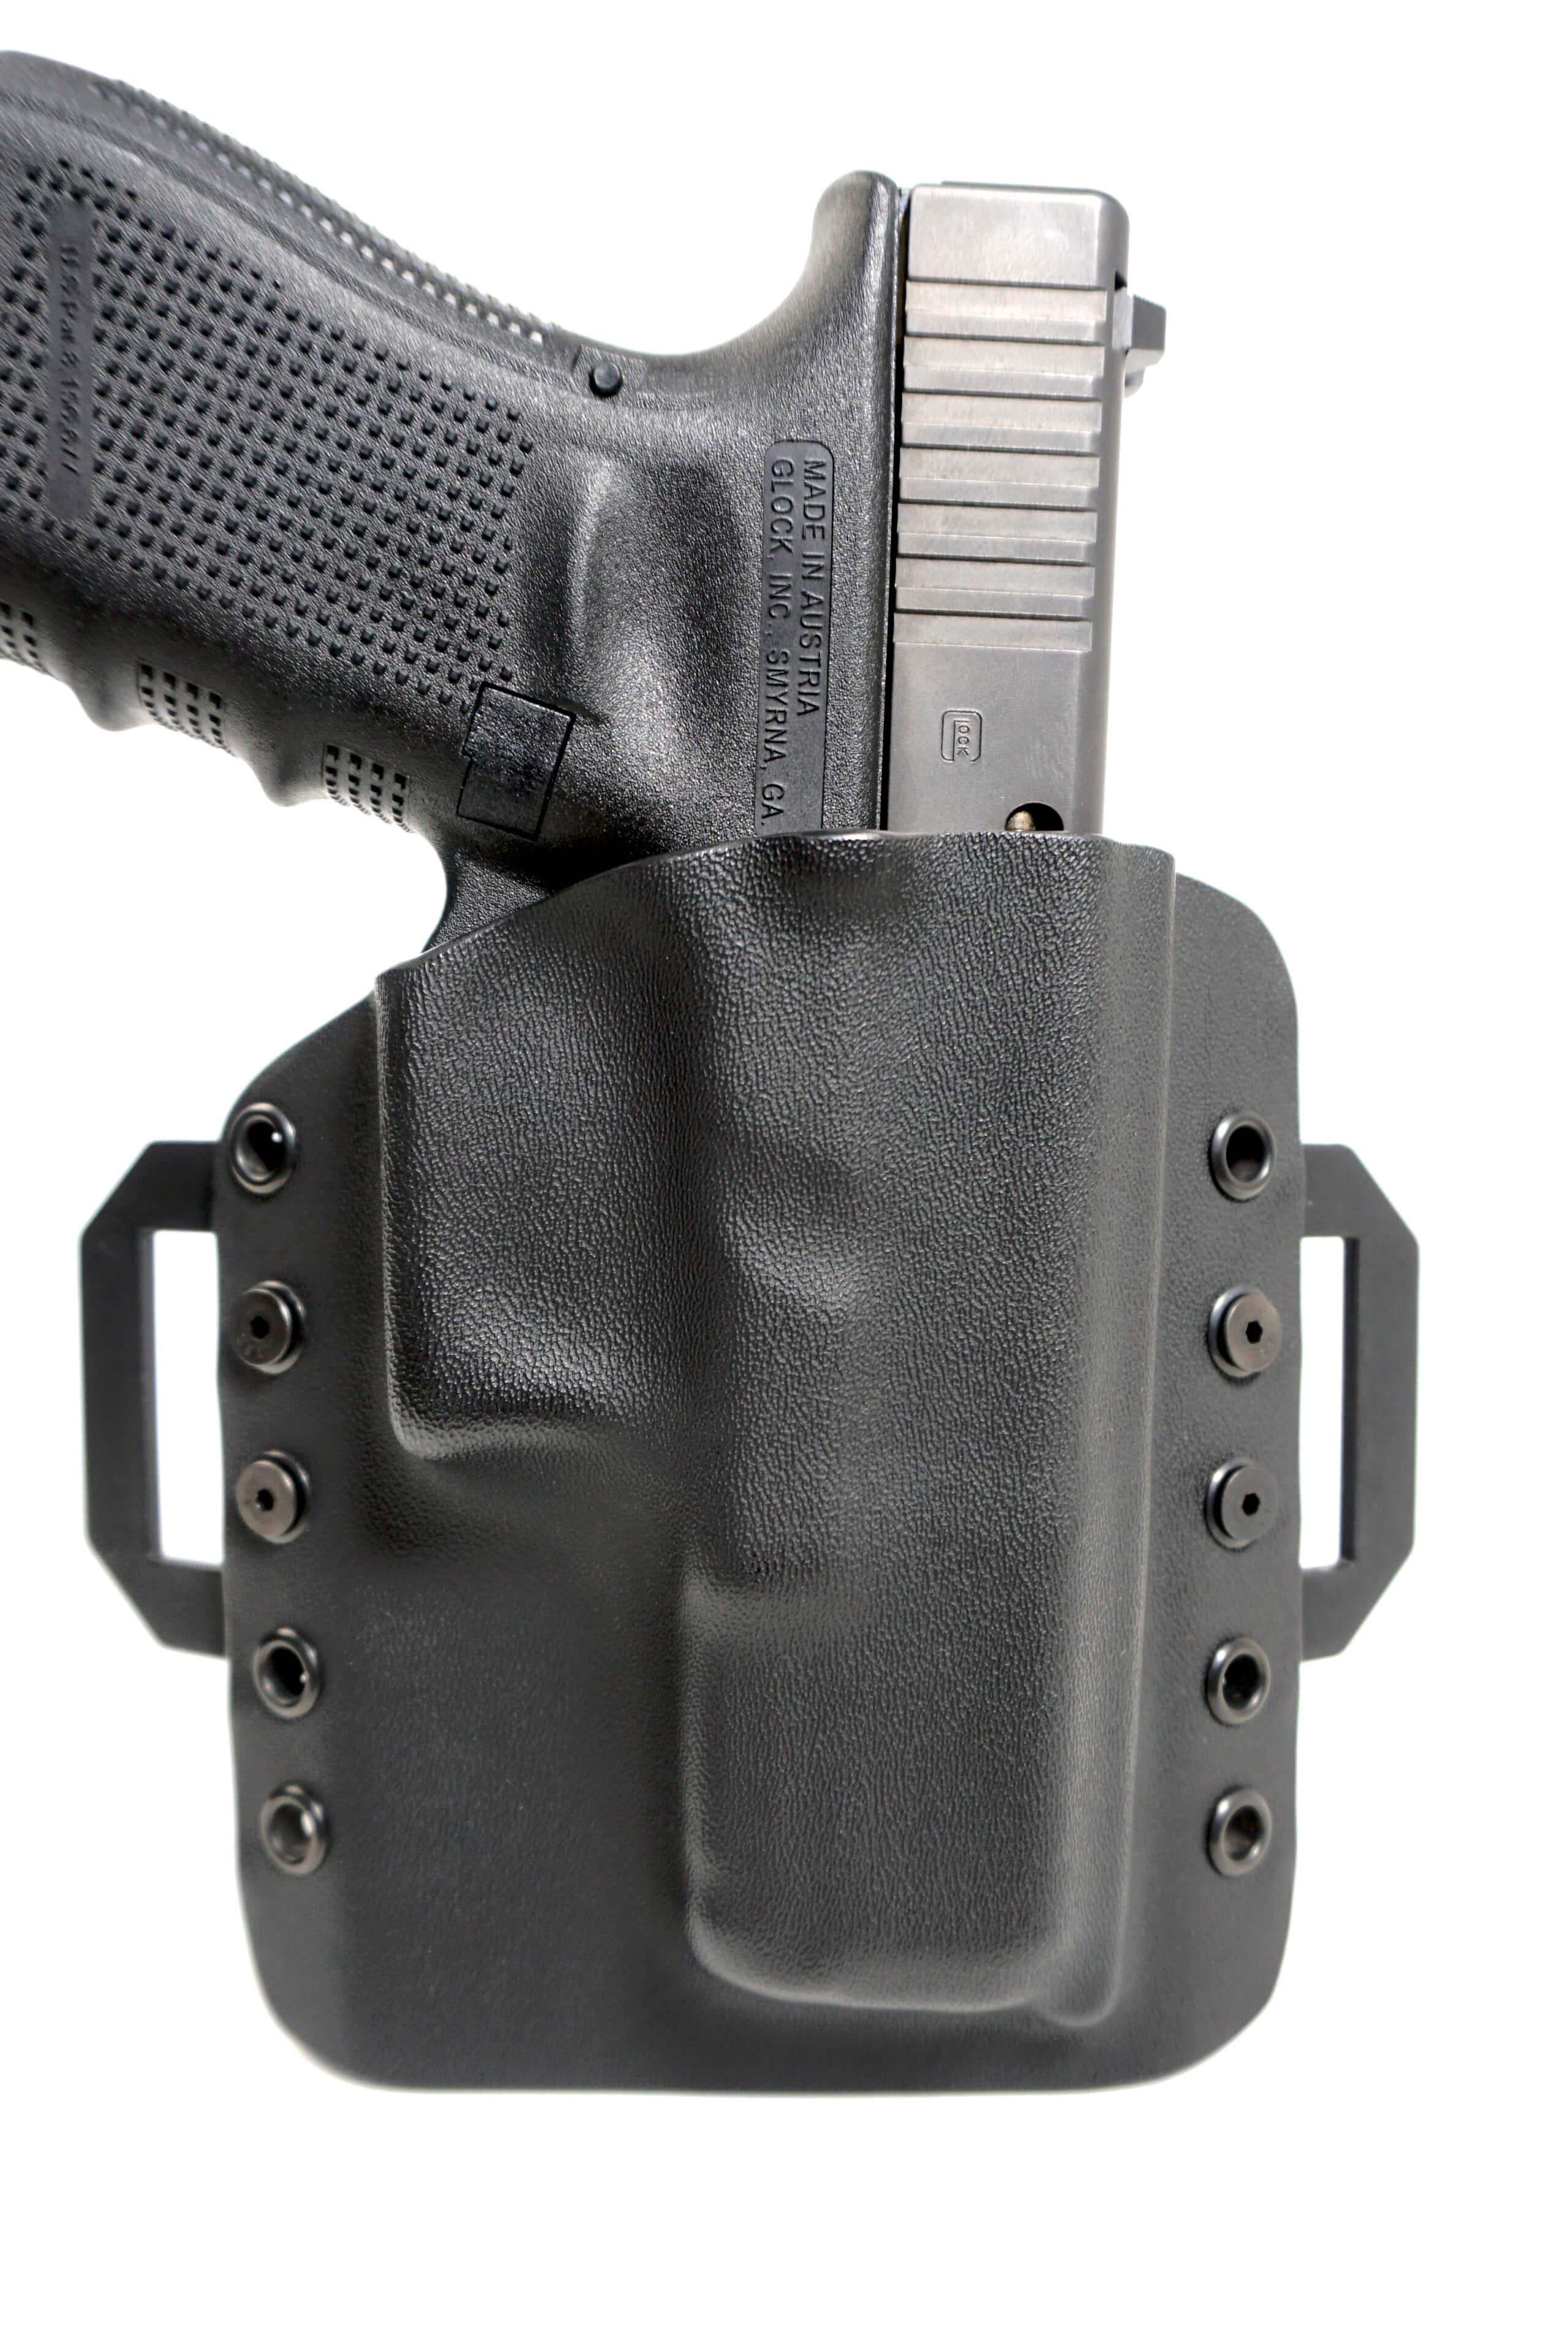 Springfield Armory XDS 3.3 KYDEX Gun Holster OWB 